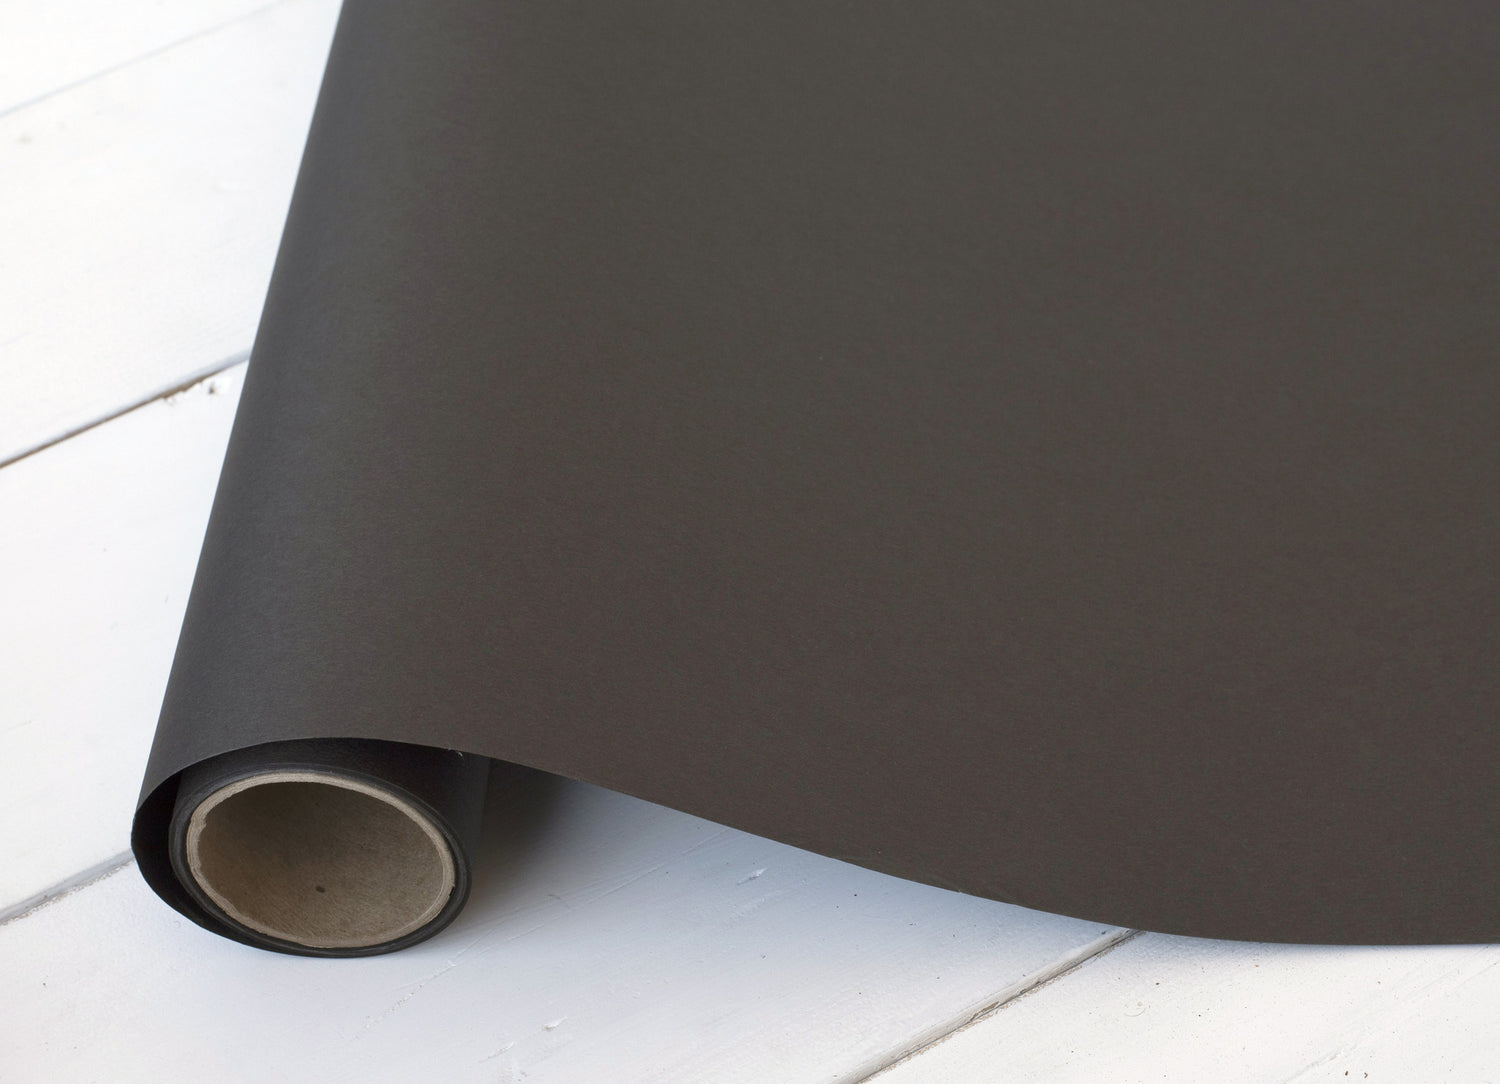 Close-up of the Chalkboard Runner paper roll, showing solid black paper.